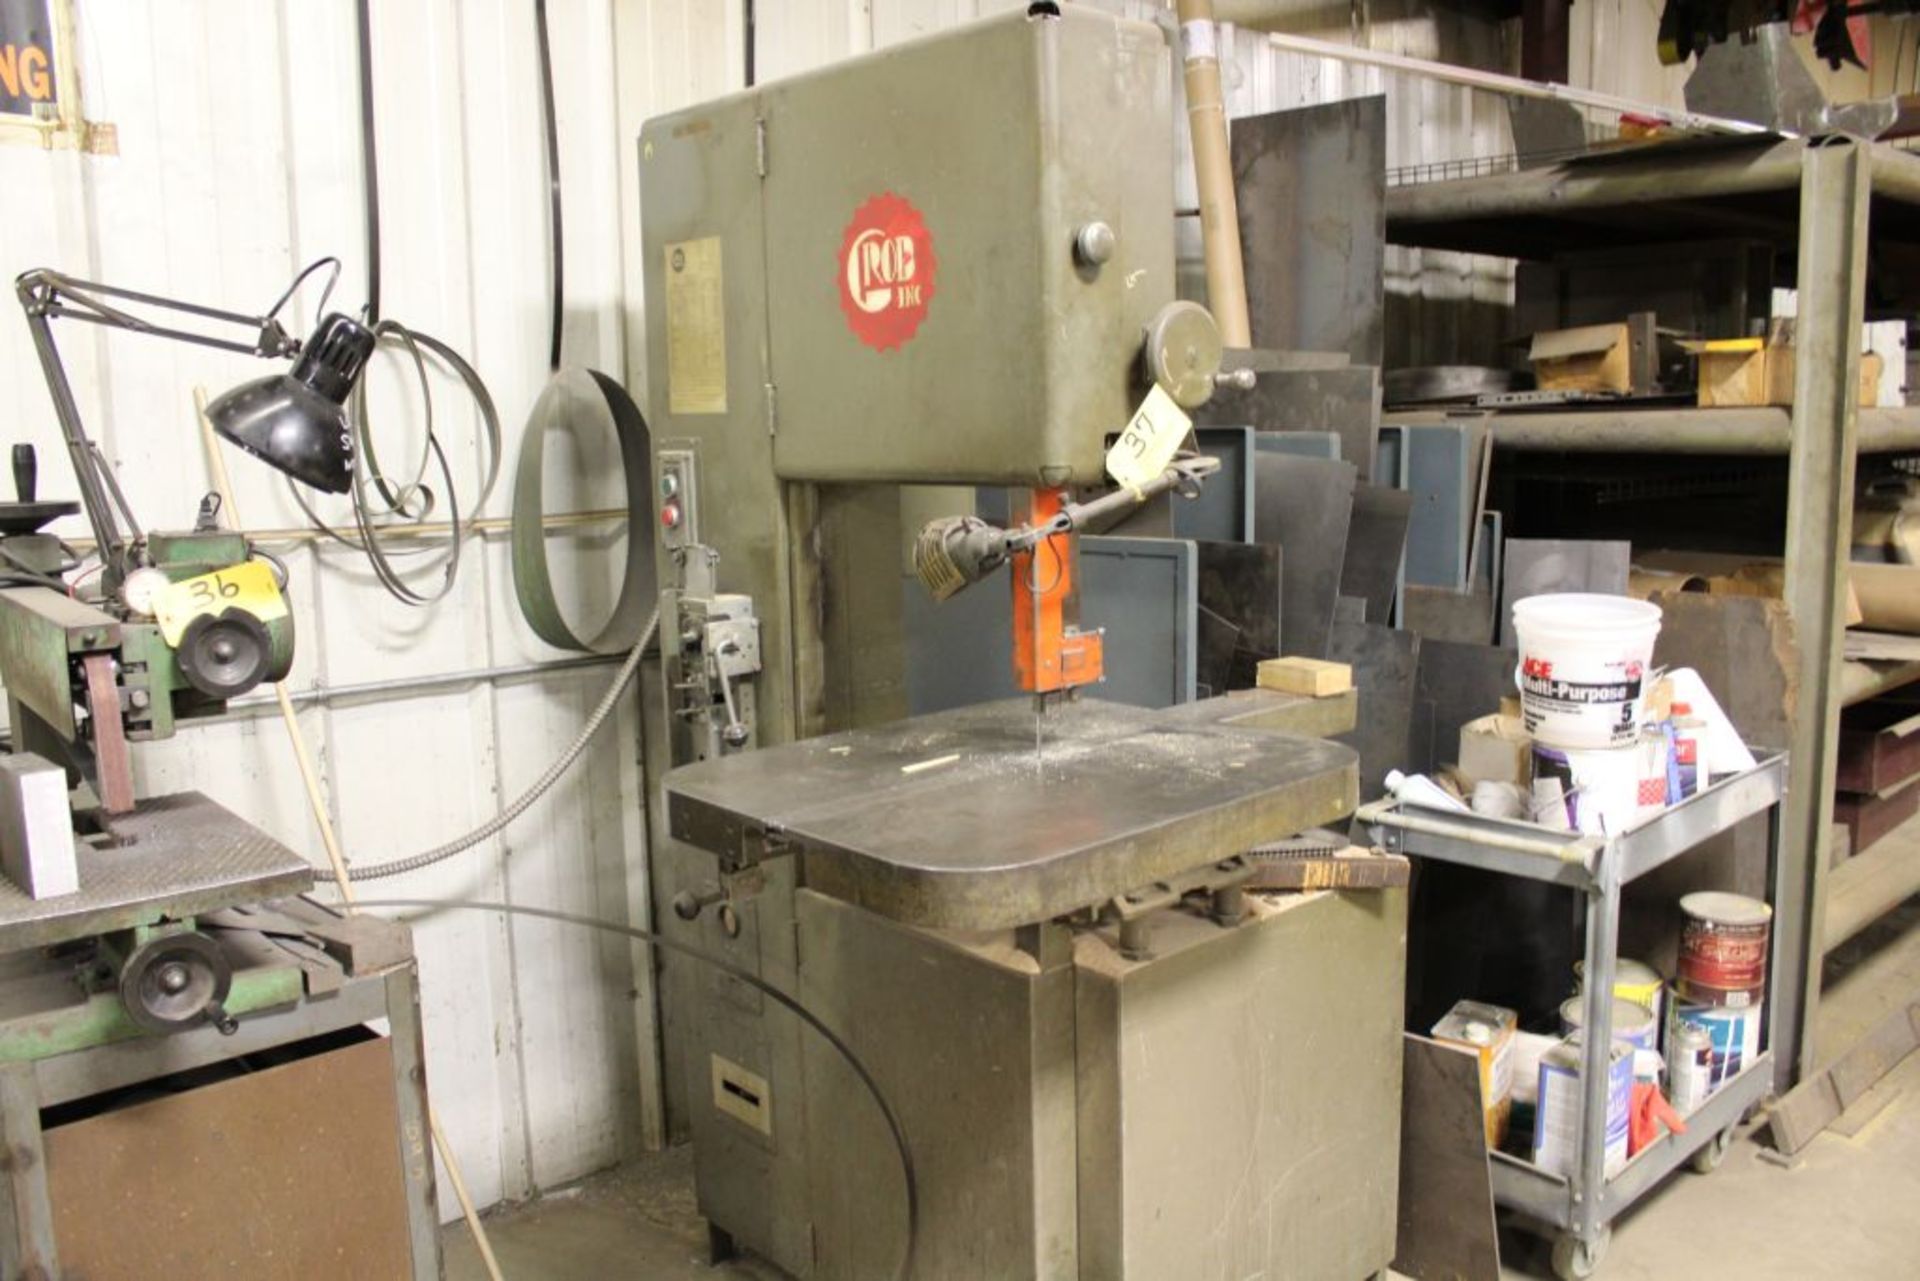 1978 Grob vertical band saw, model 4V-18, sn 3737, w/butt welder. Sells with owners confirmation.